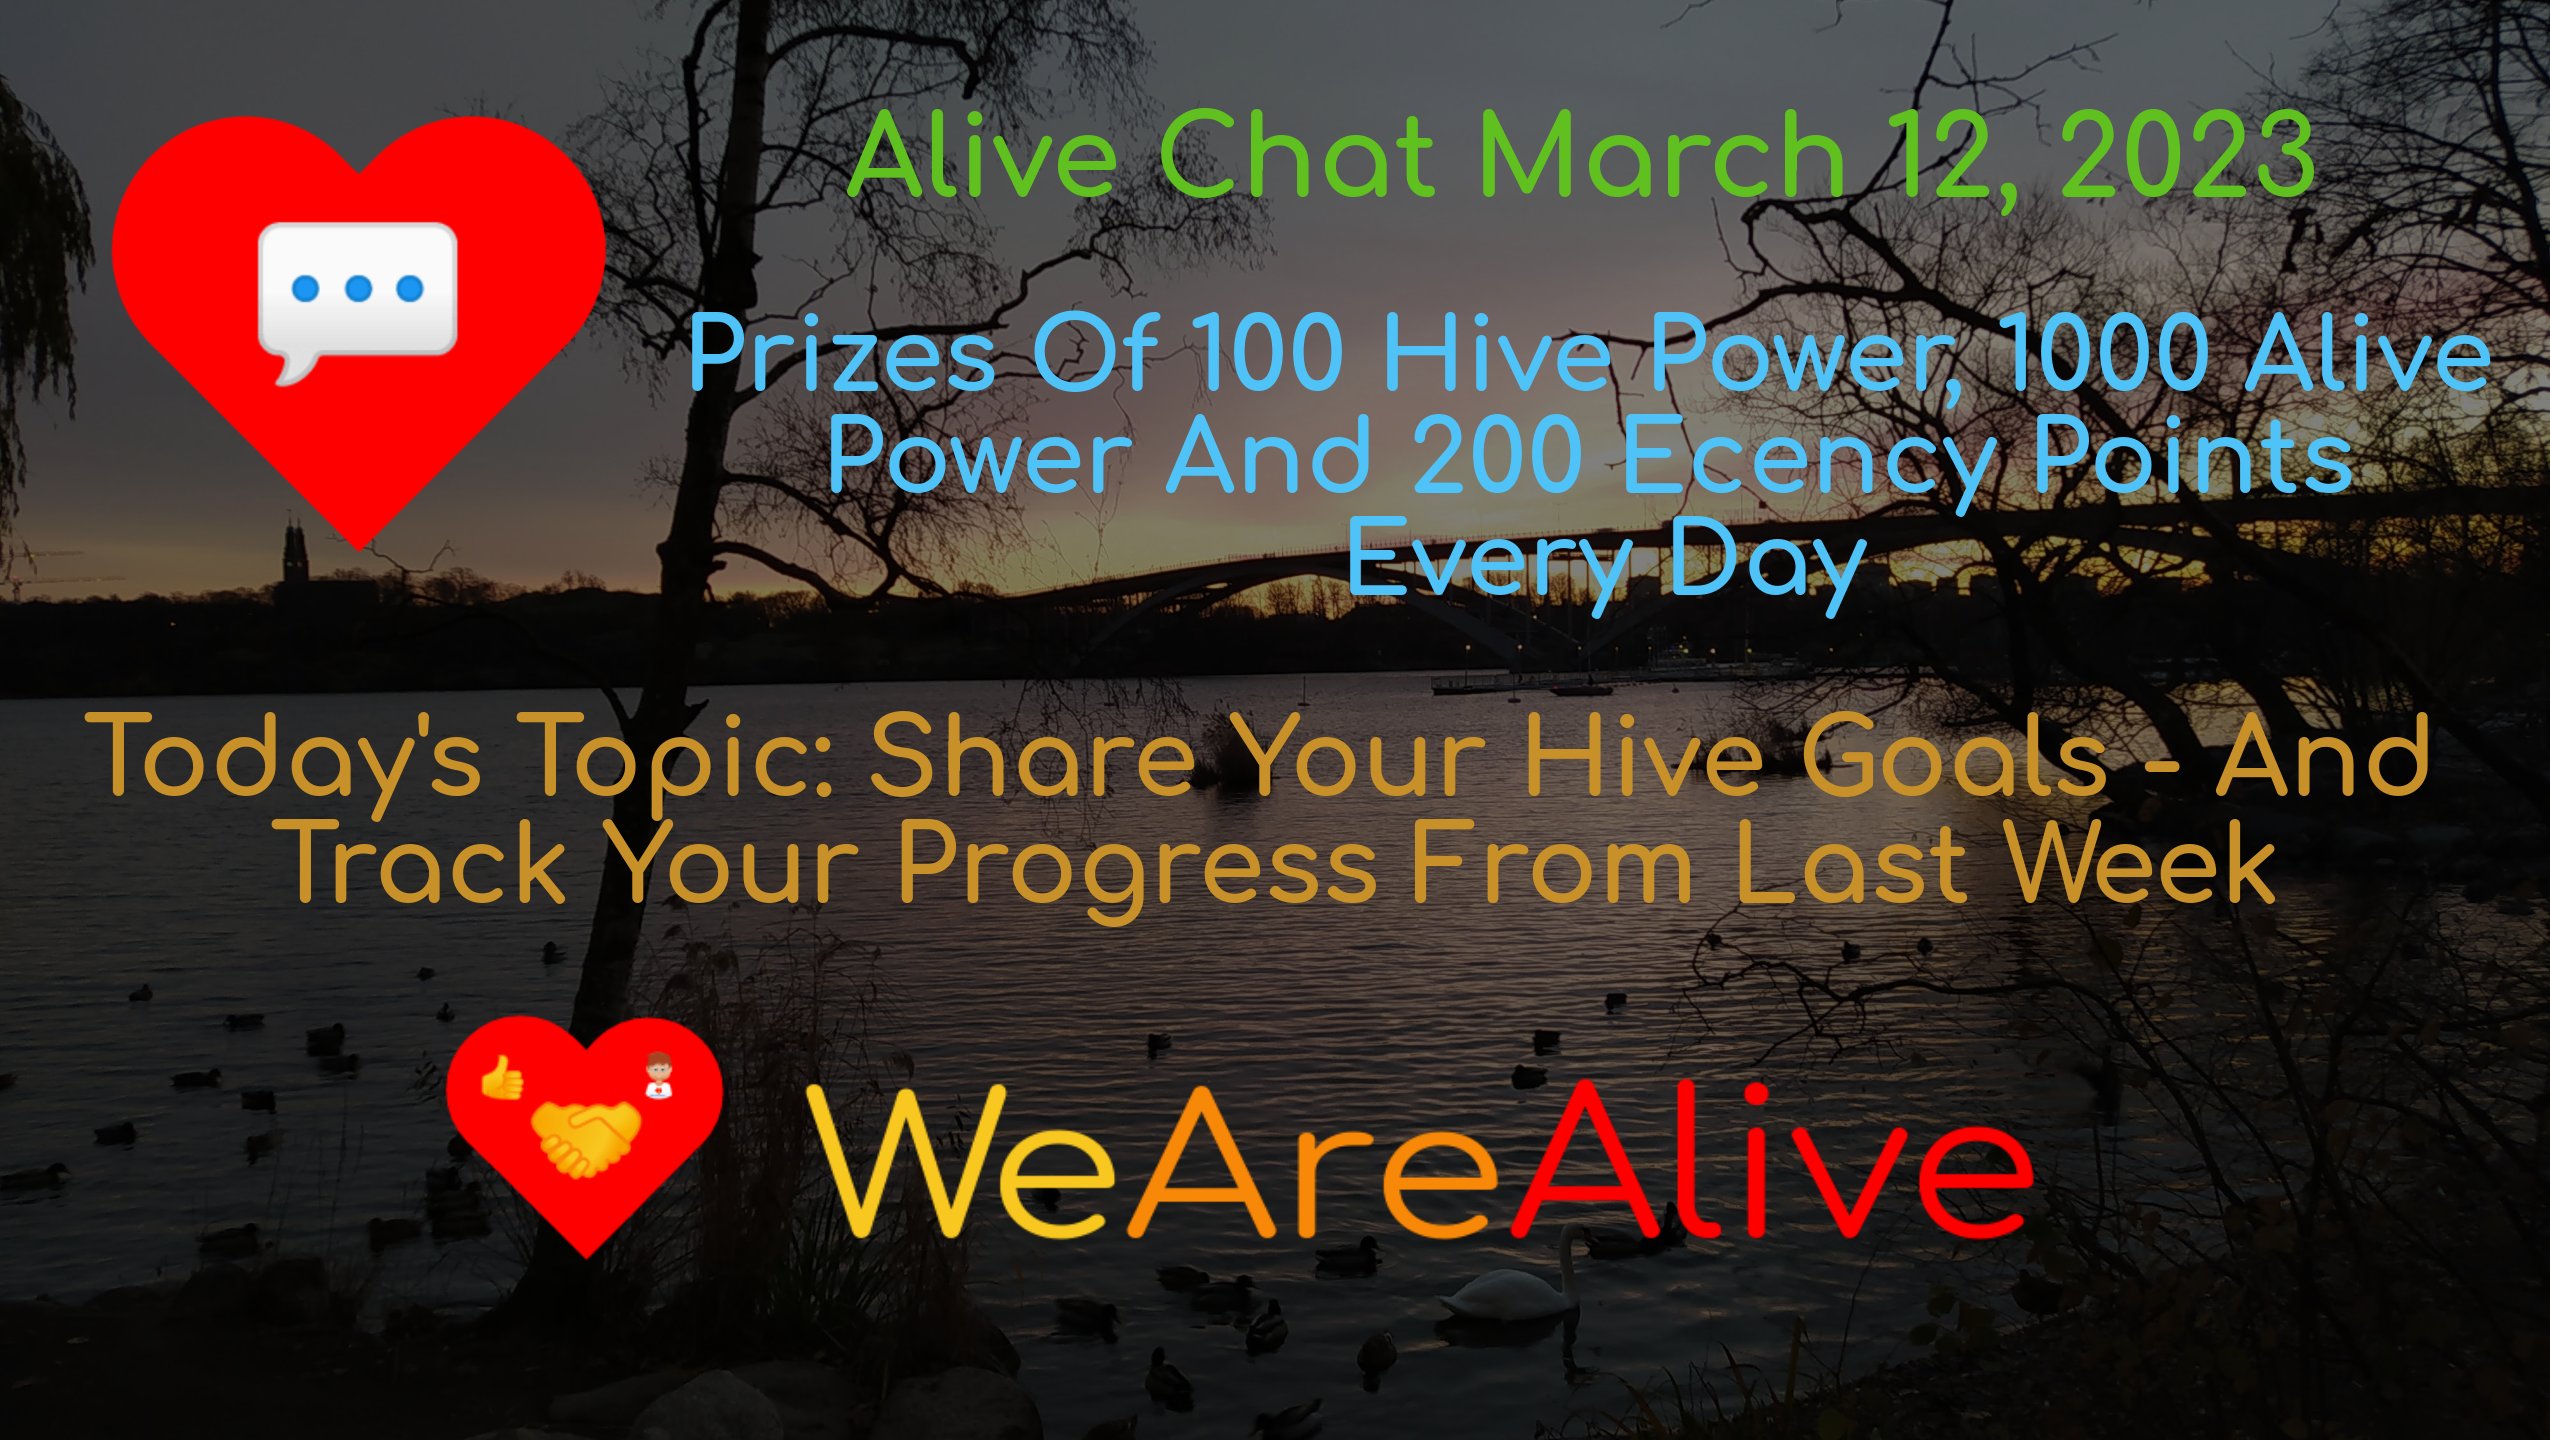 @alive.chat/alive-chat-march-12-2023